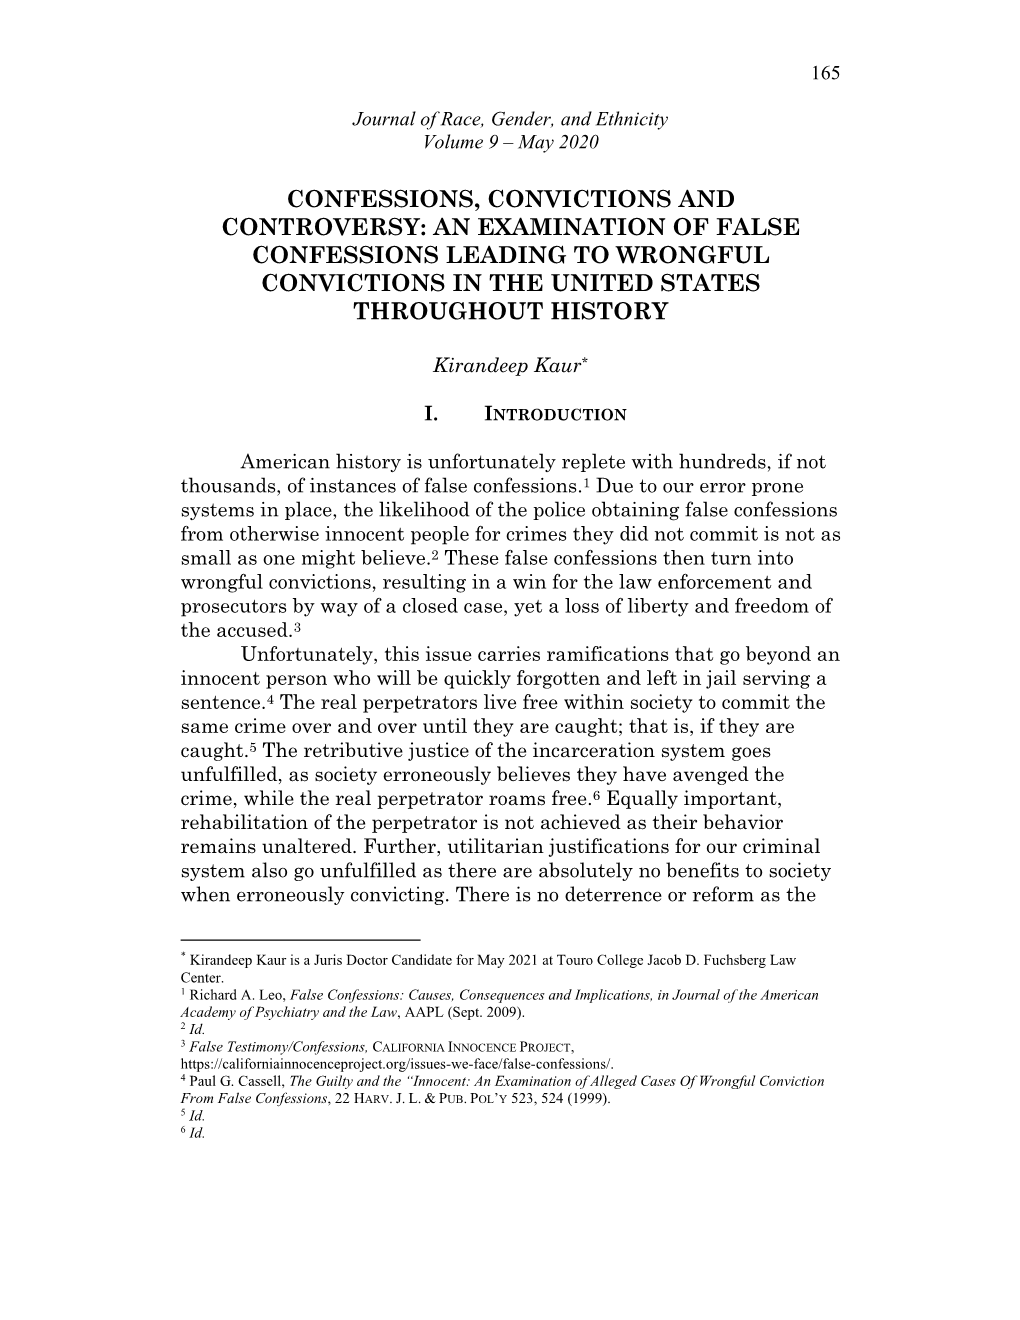 Confessions, Convictions and Controversy: an Examination of False Confessions Leading to Wrongful Convictions in the United States Throughout History